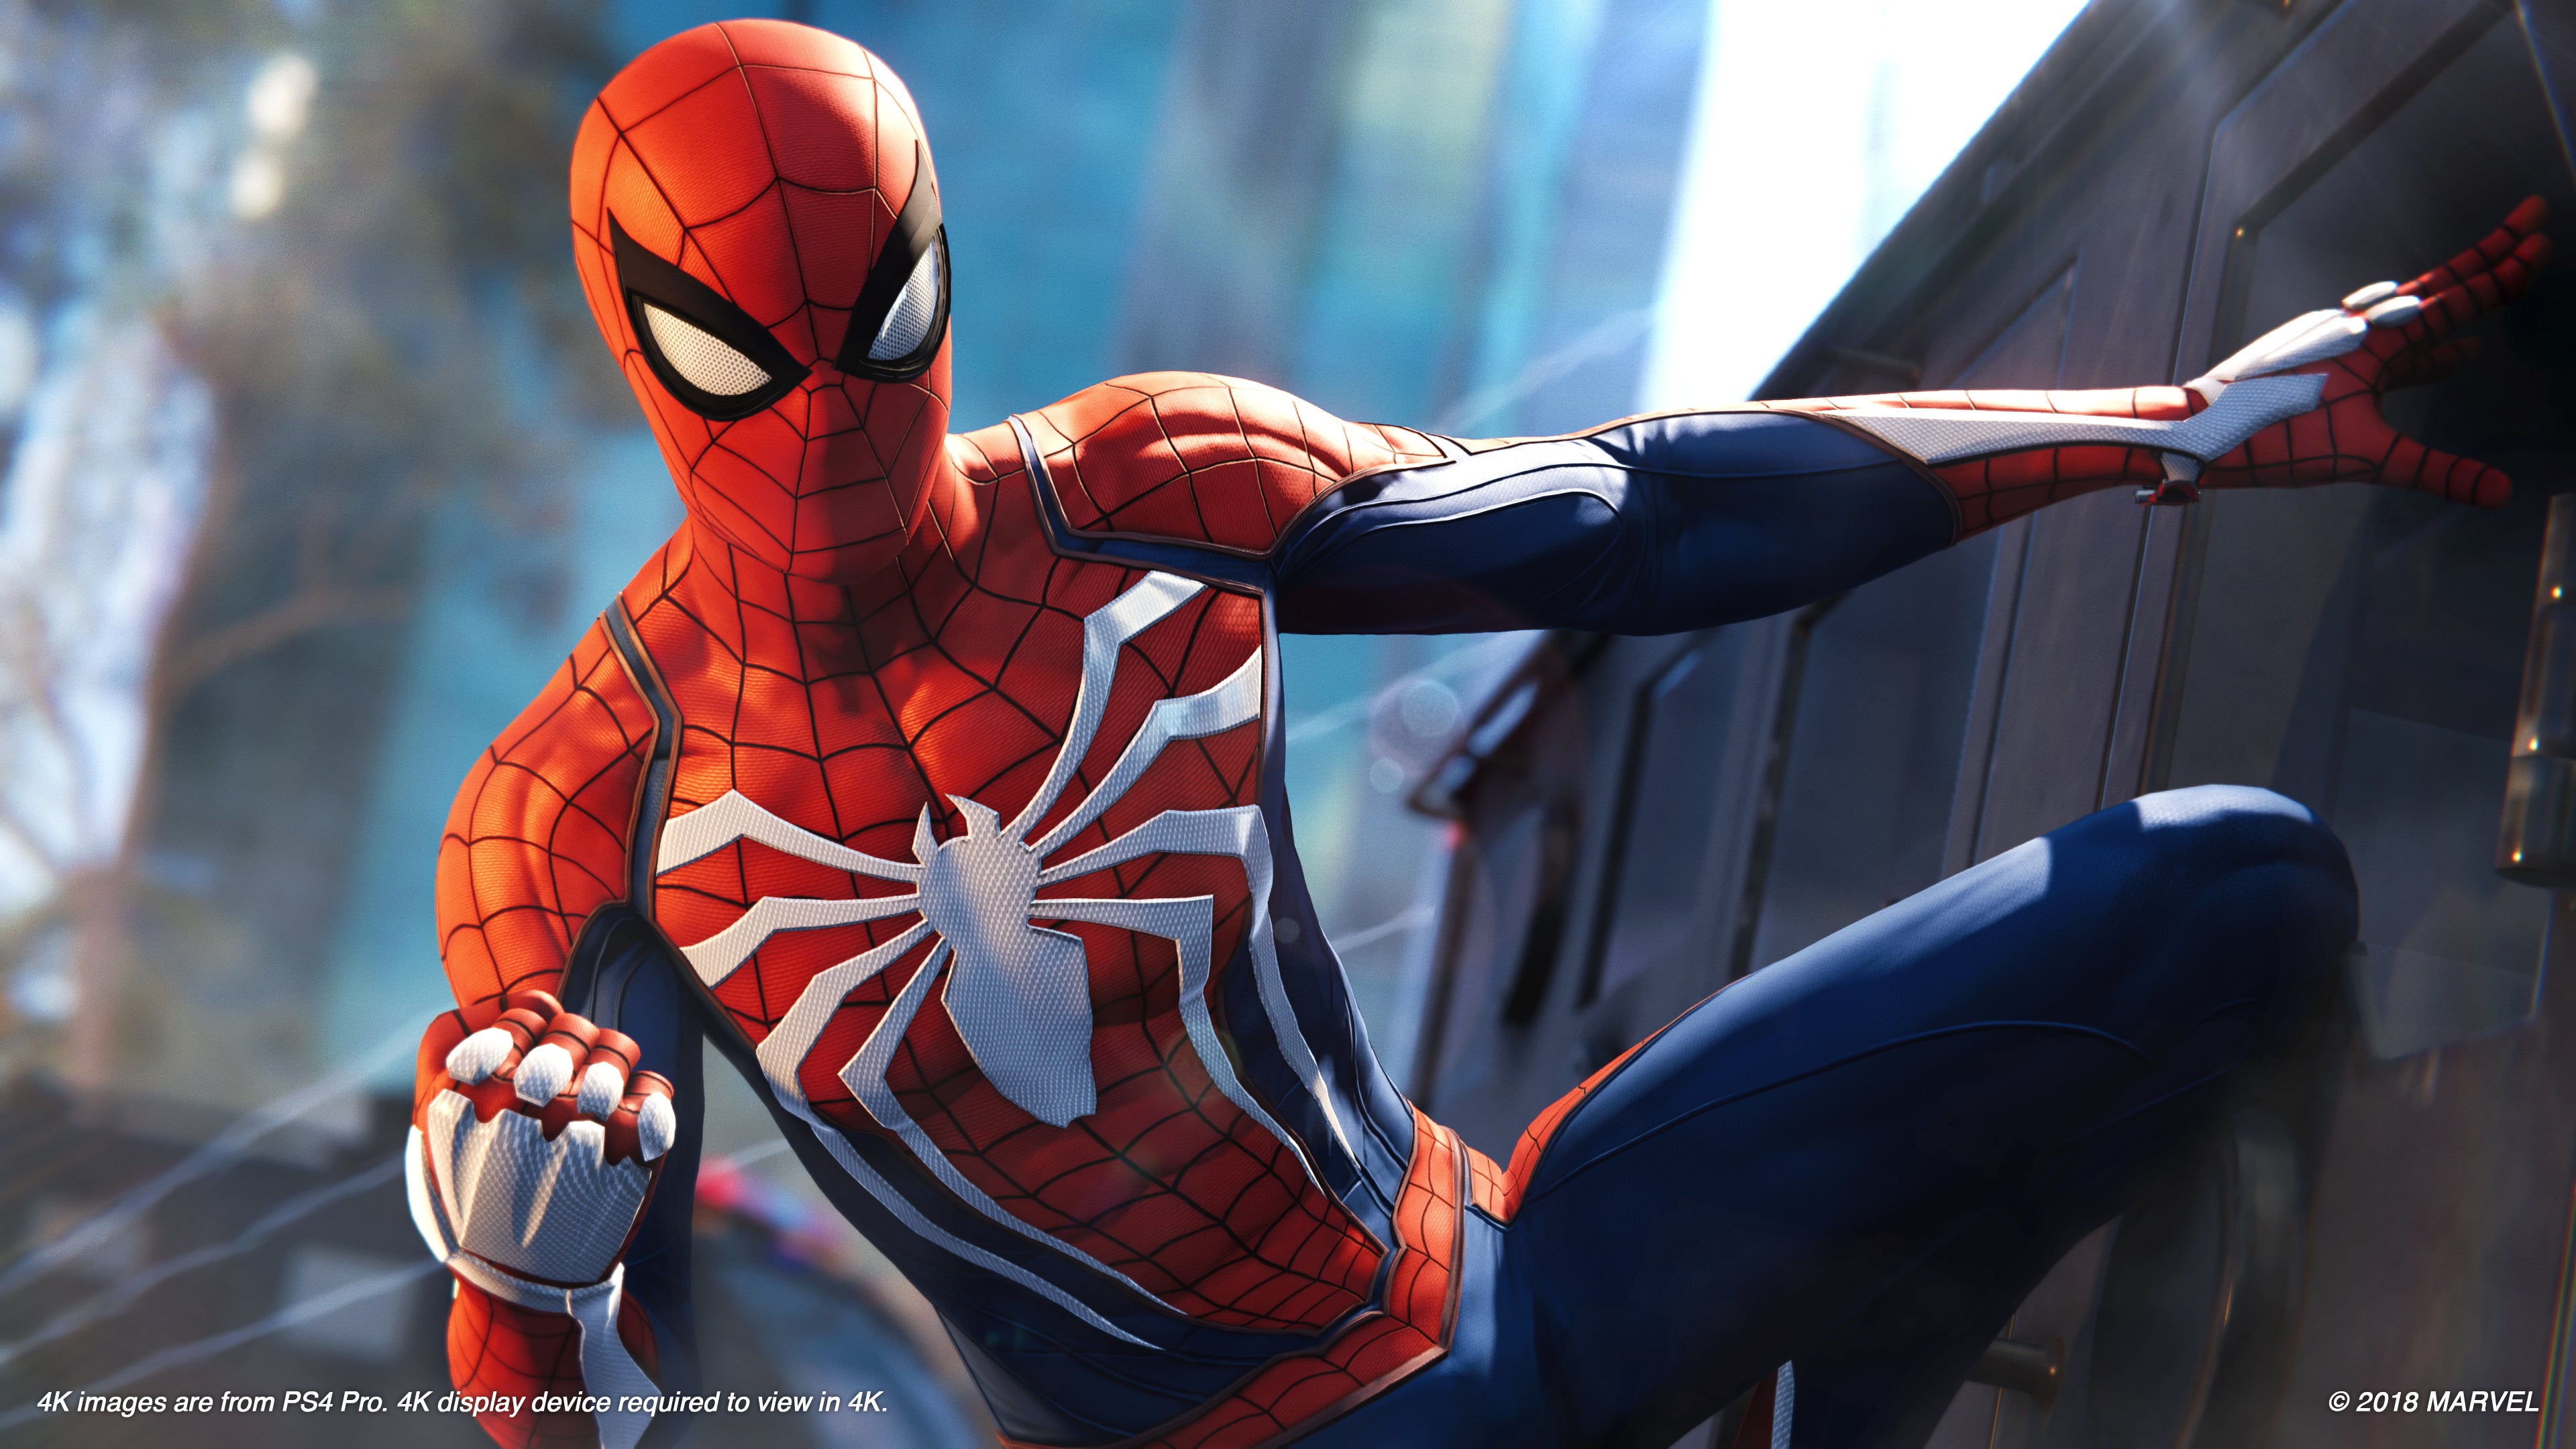 Image for PS5: watch PS4's Spider-Man running on next-generation hardware